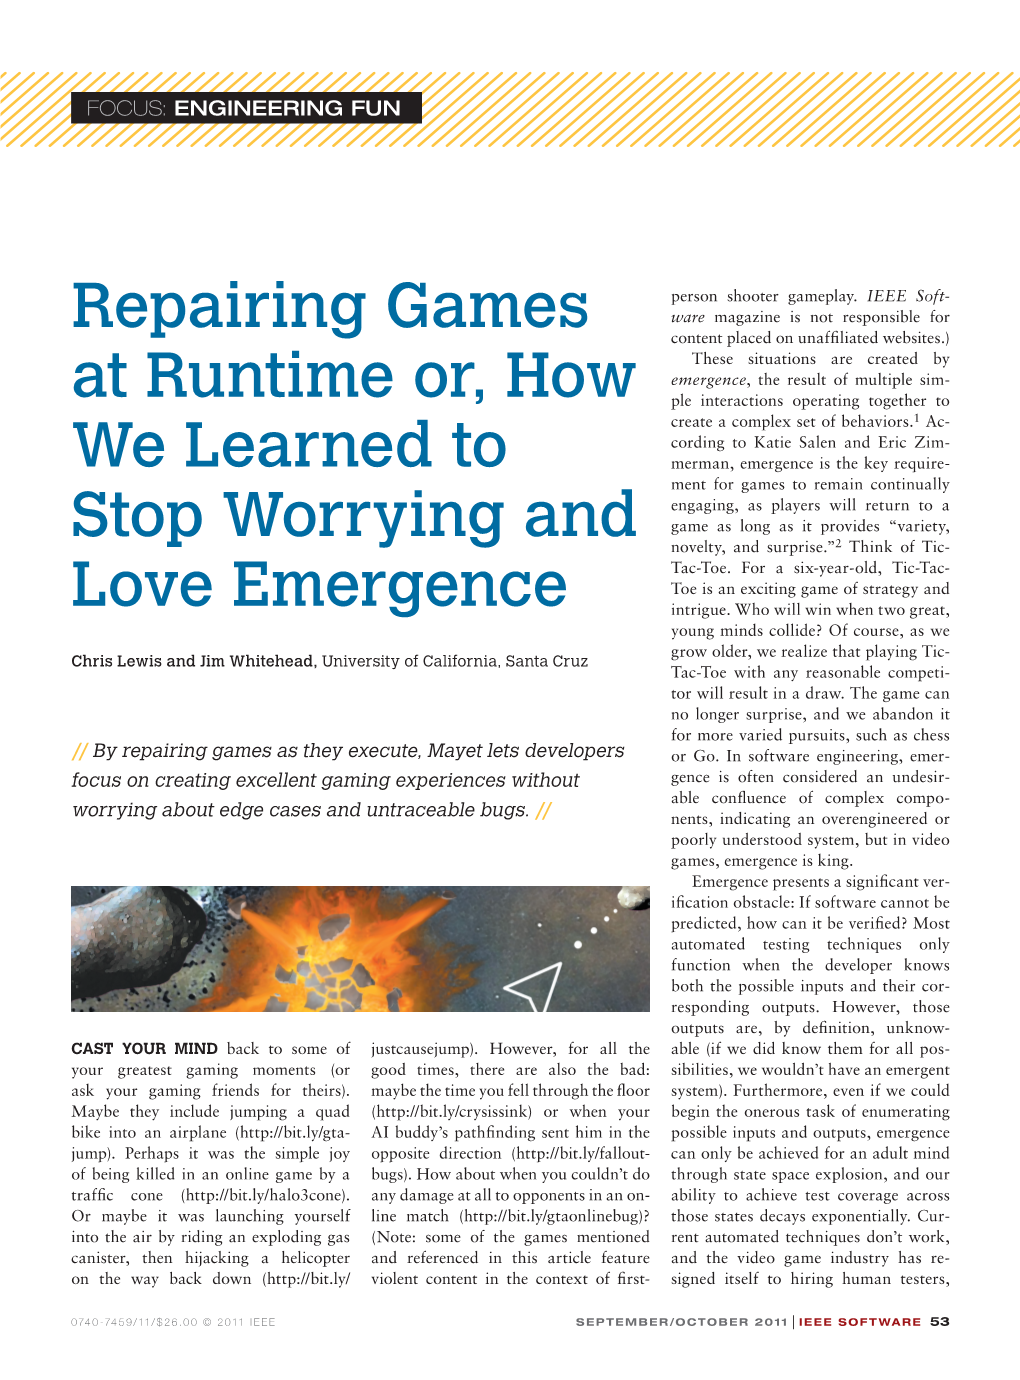 Repairing Games at Runtime Or, How We Learned to Stop Worrying And